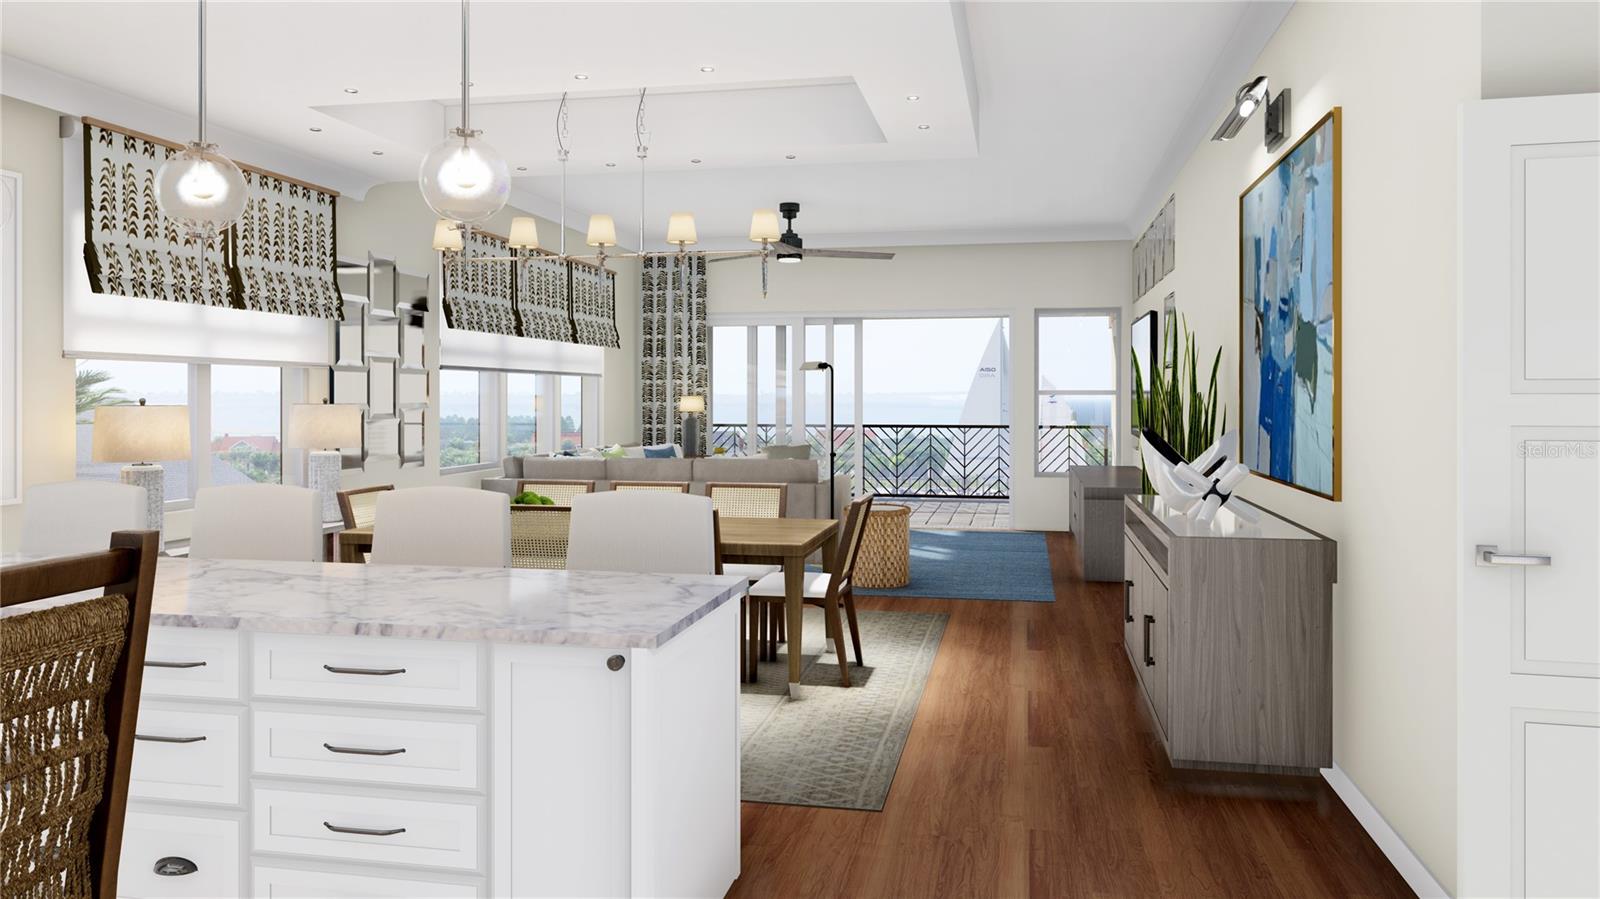 The kitchen overlooks the dining/living room and out to the balcony overlooking the water